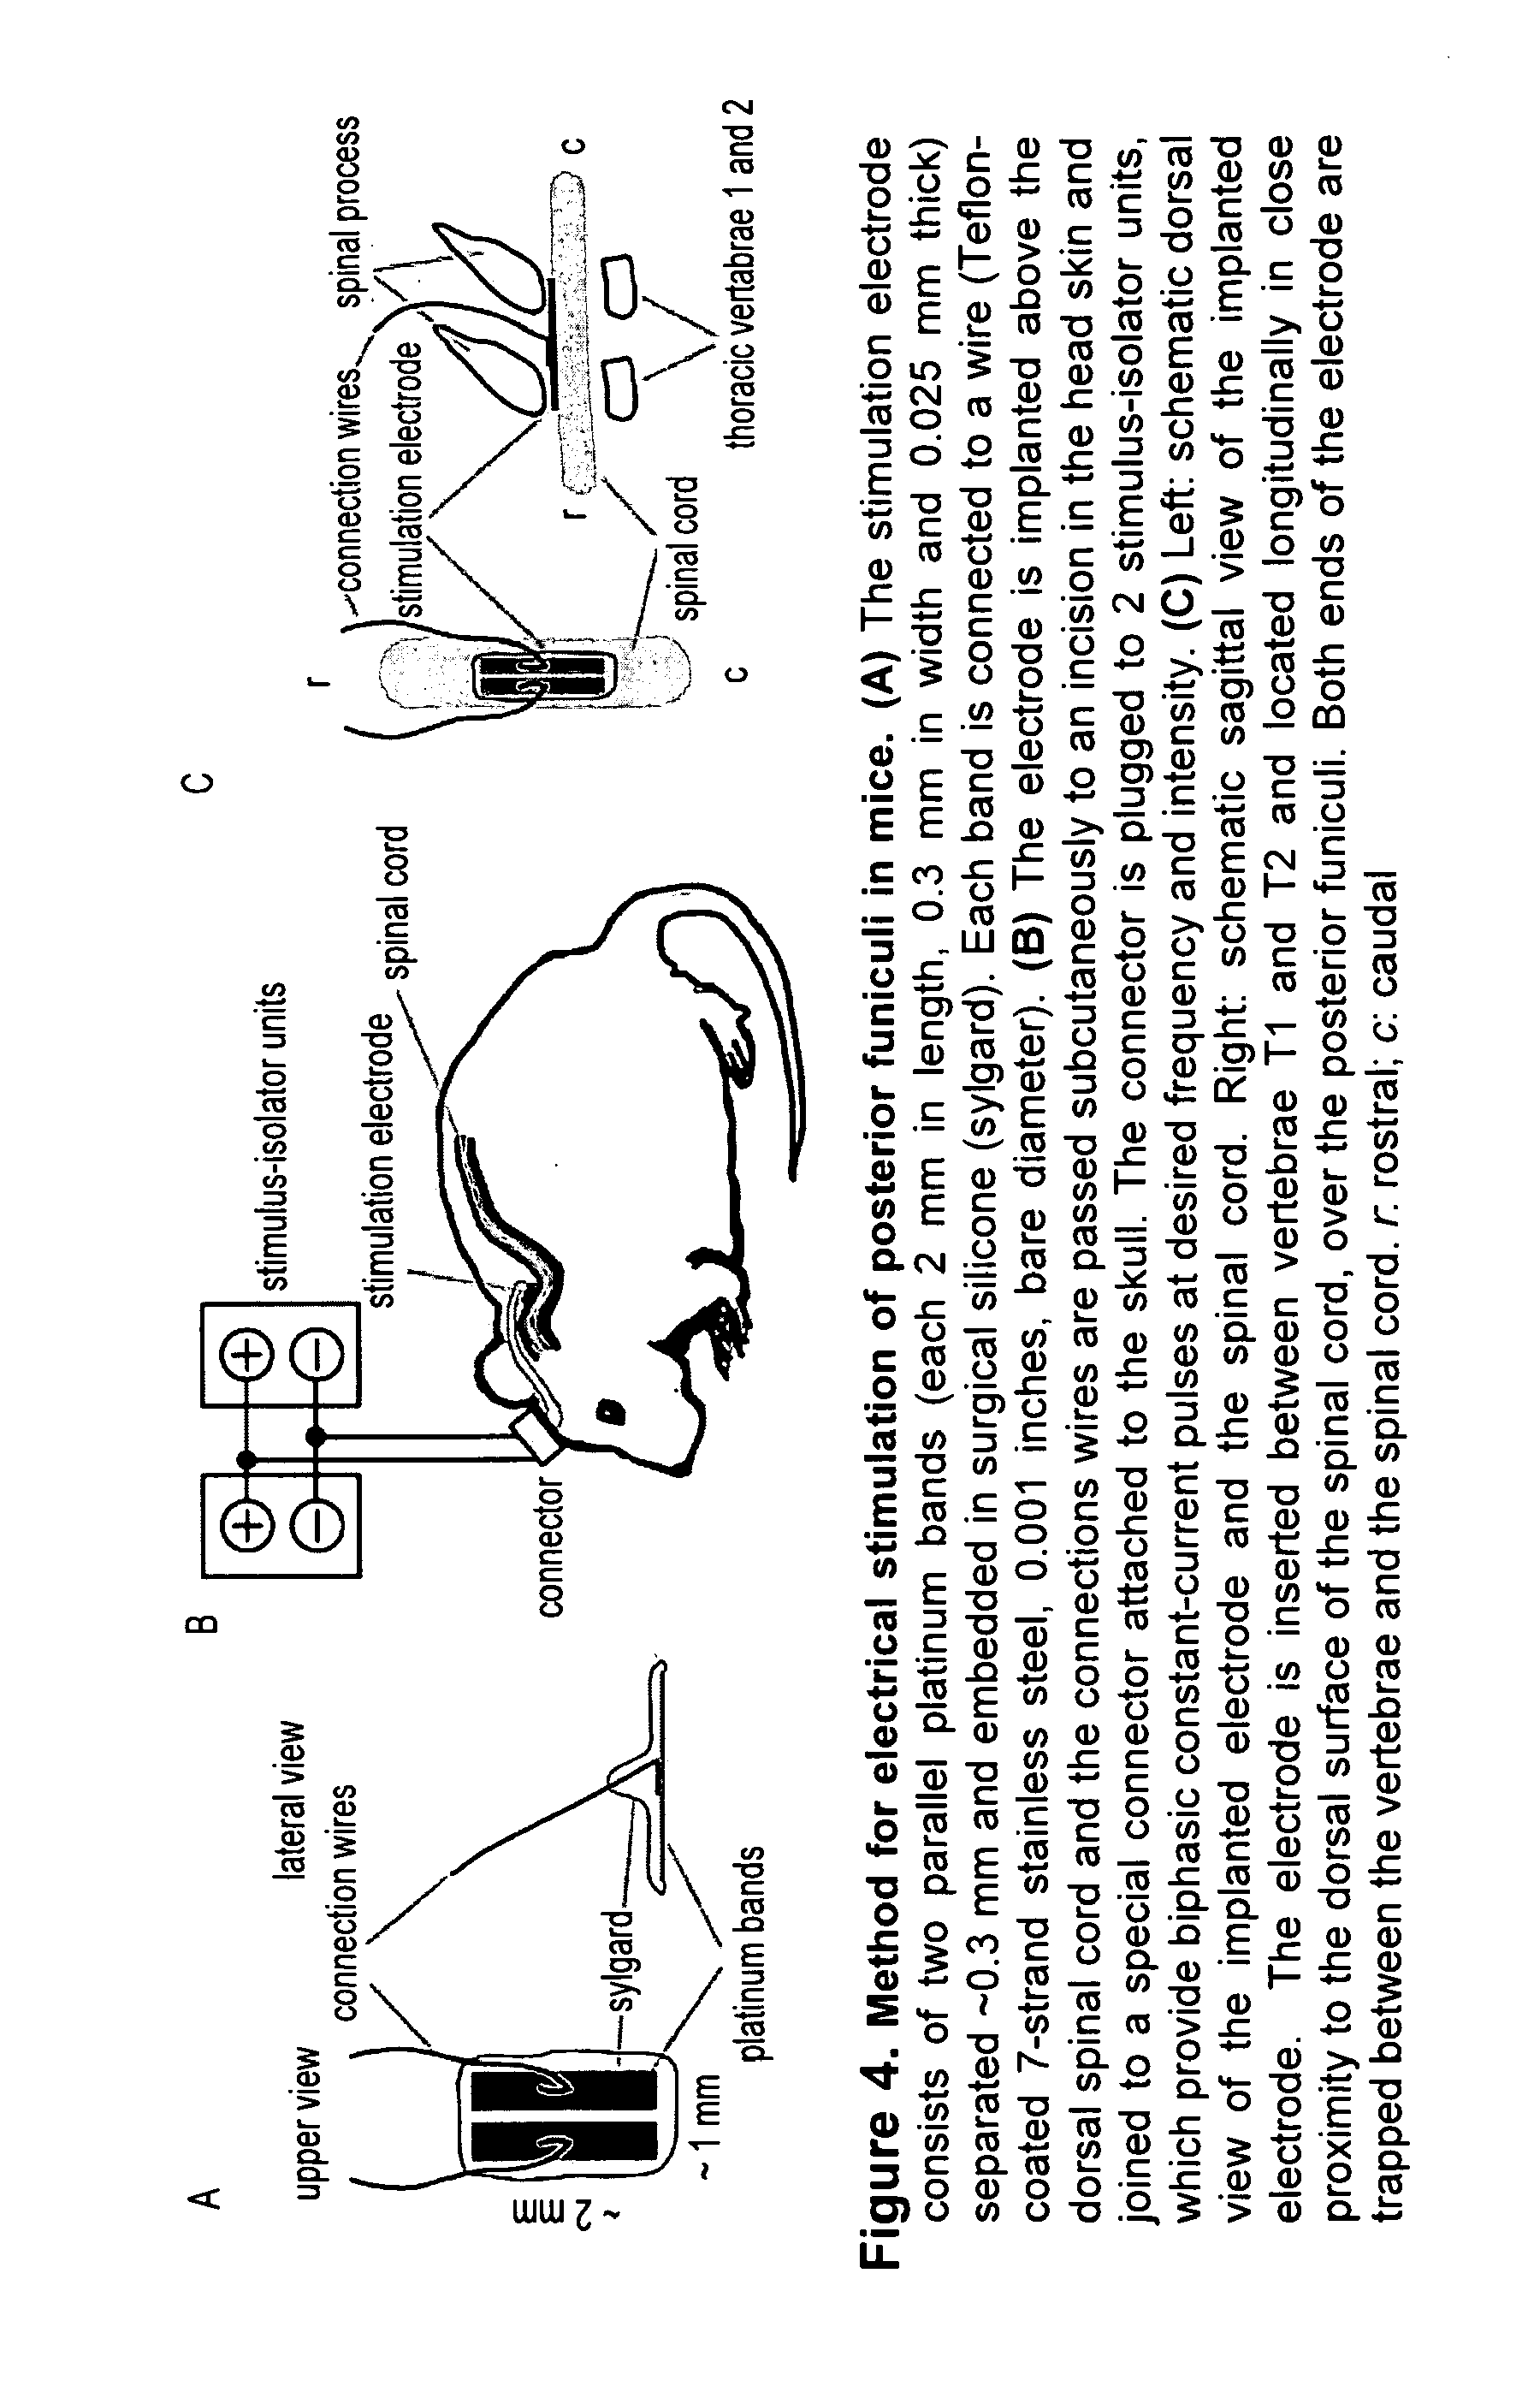 Method of treating parkinson's disease and other movement disorders